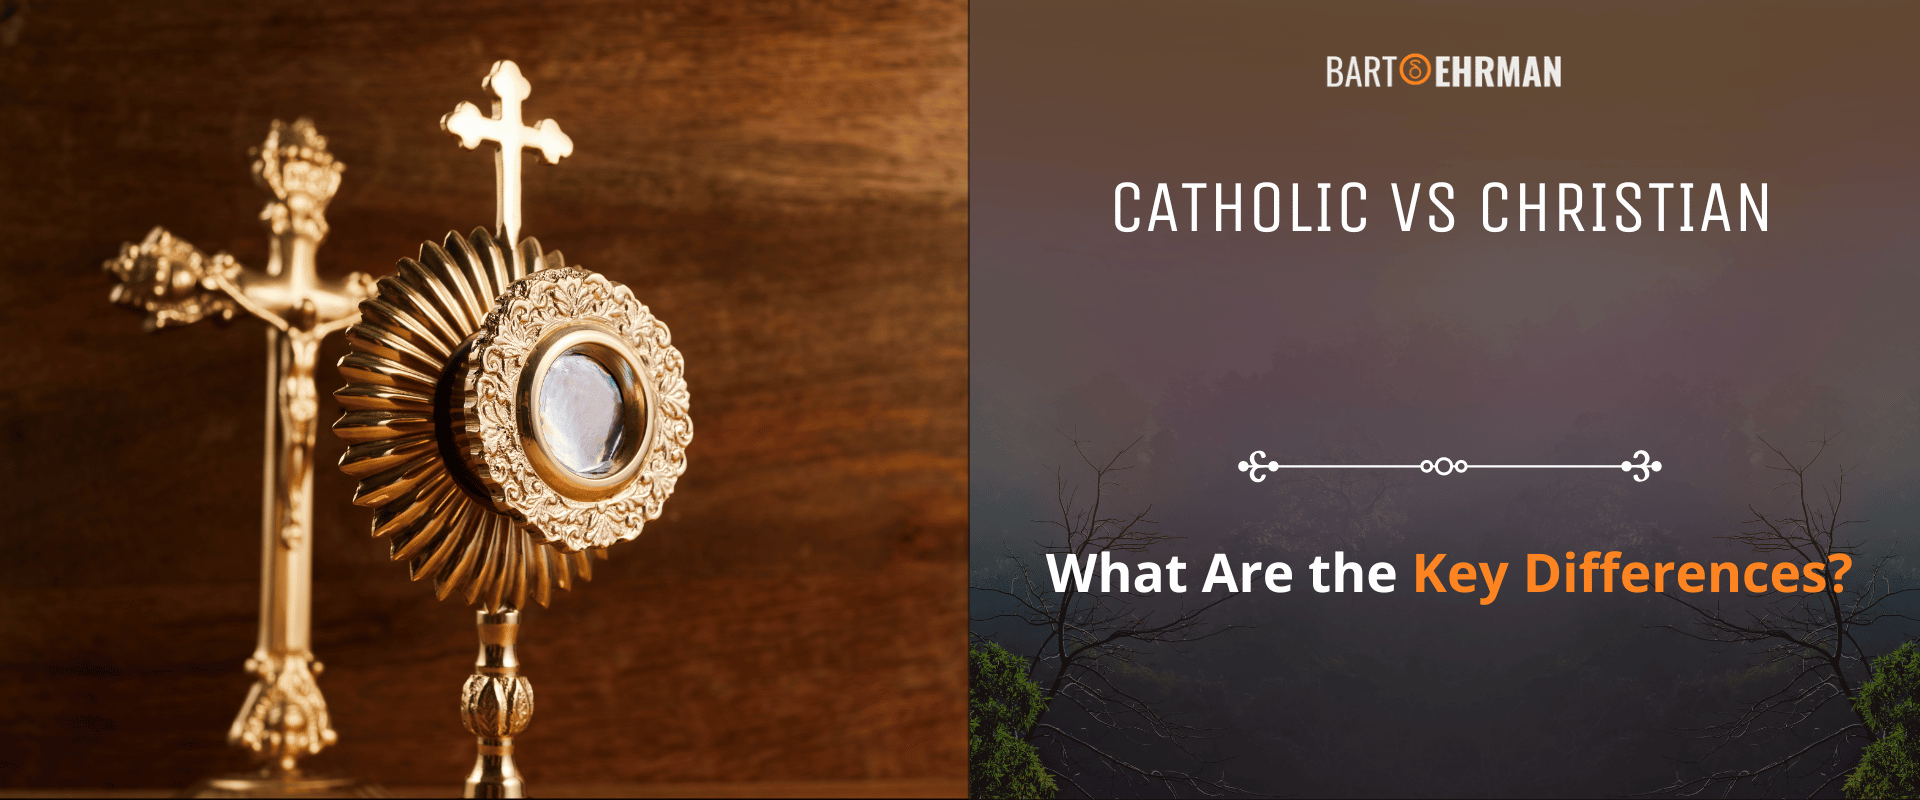 Catholic vs Christian - What Are the Key Differences